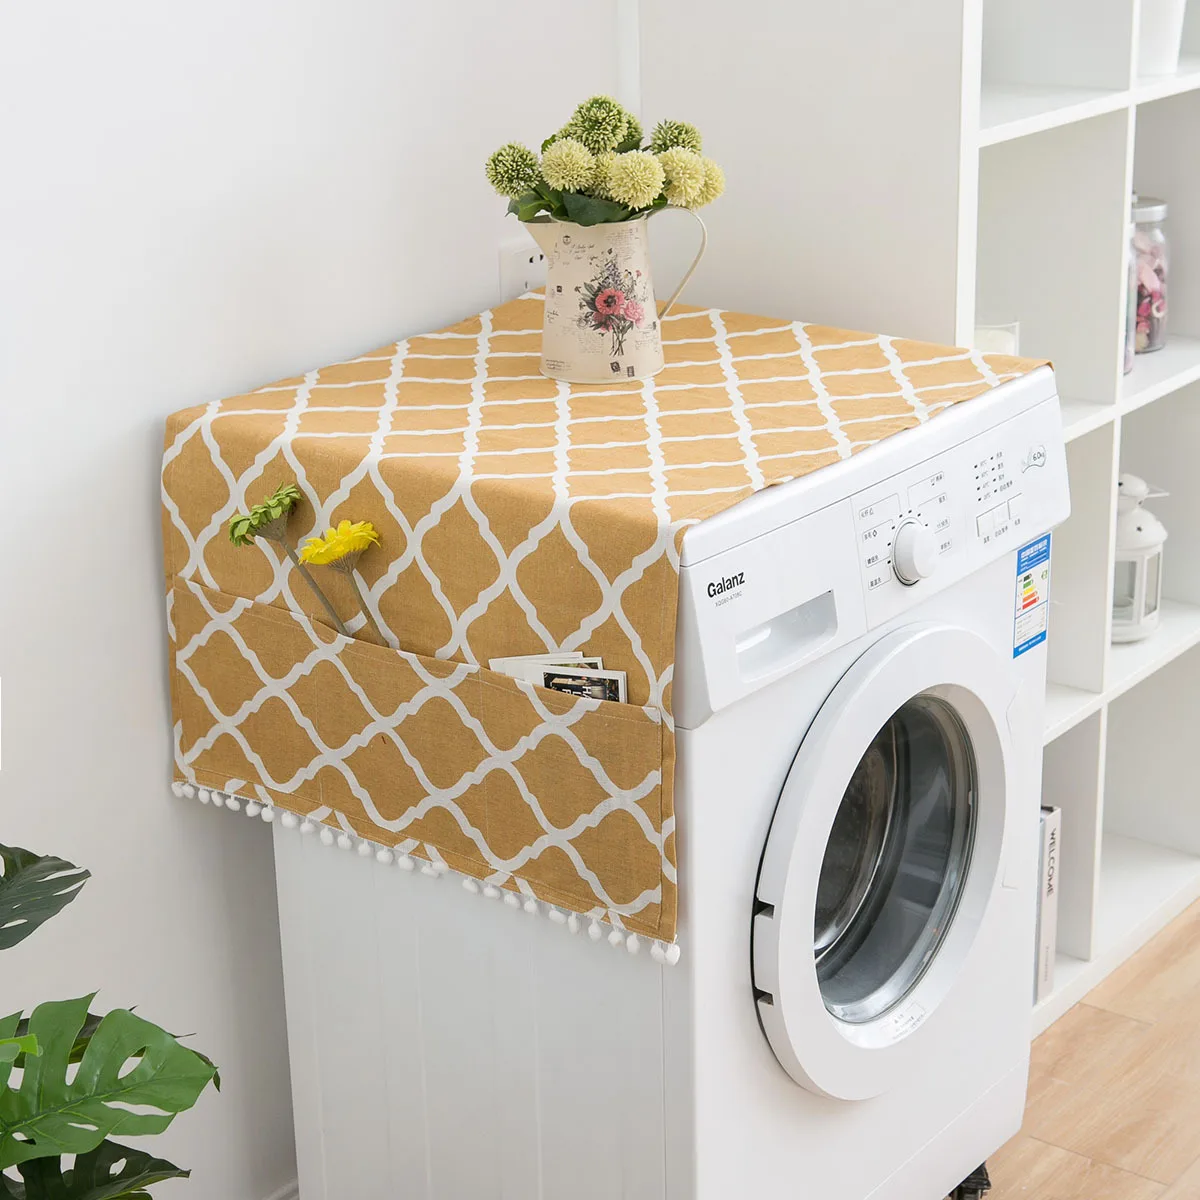 

Household Dust-proof Cover Cotton Washing Machine Covers Tumble Dryer Laundry Gadgets Pocket Organizer Product Accessories Stuff